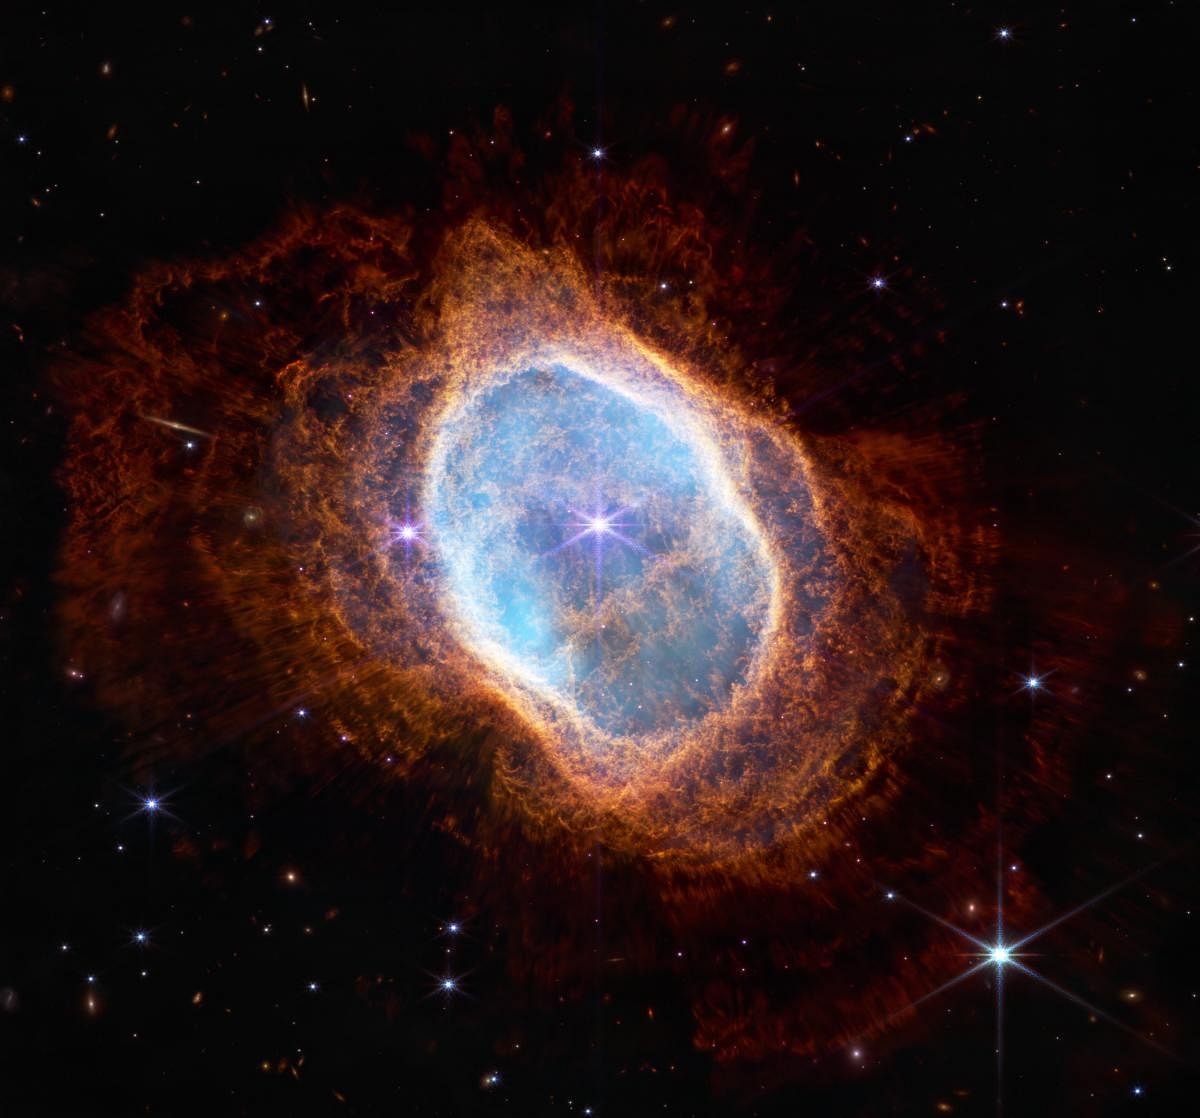 The Southern Ring Nebula in near-infrared light from NASA's Webb Telescope (Pic courtesy: Space Telescope Science Institute)